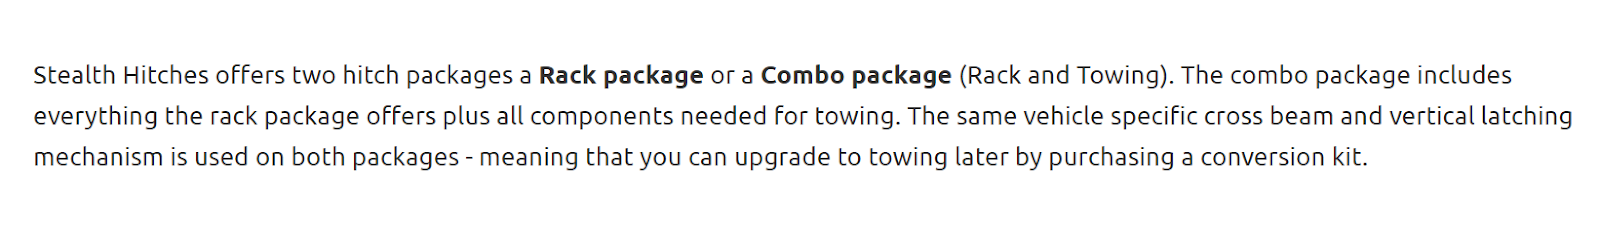 hitch upsell package description